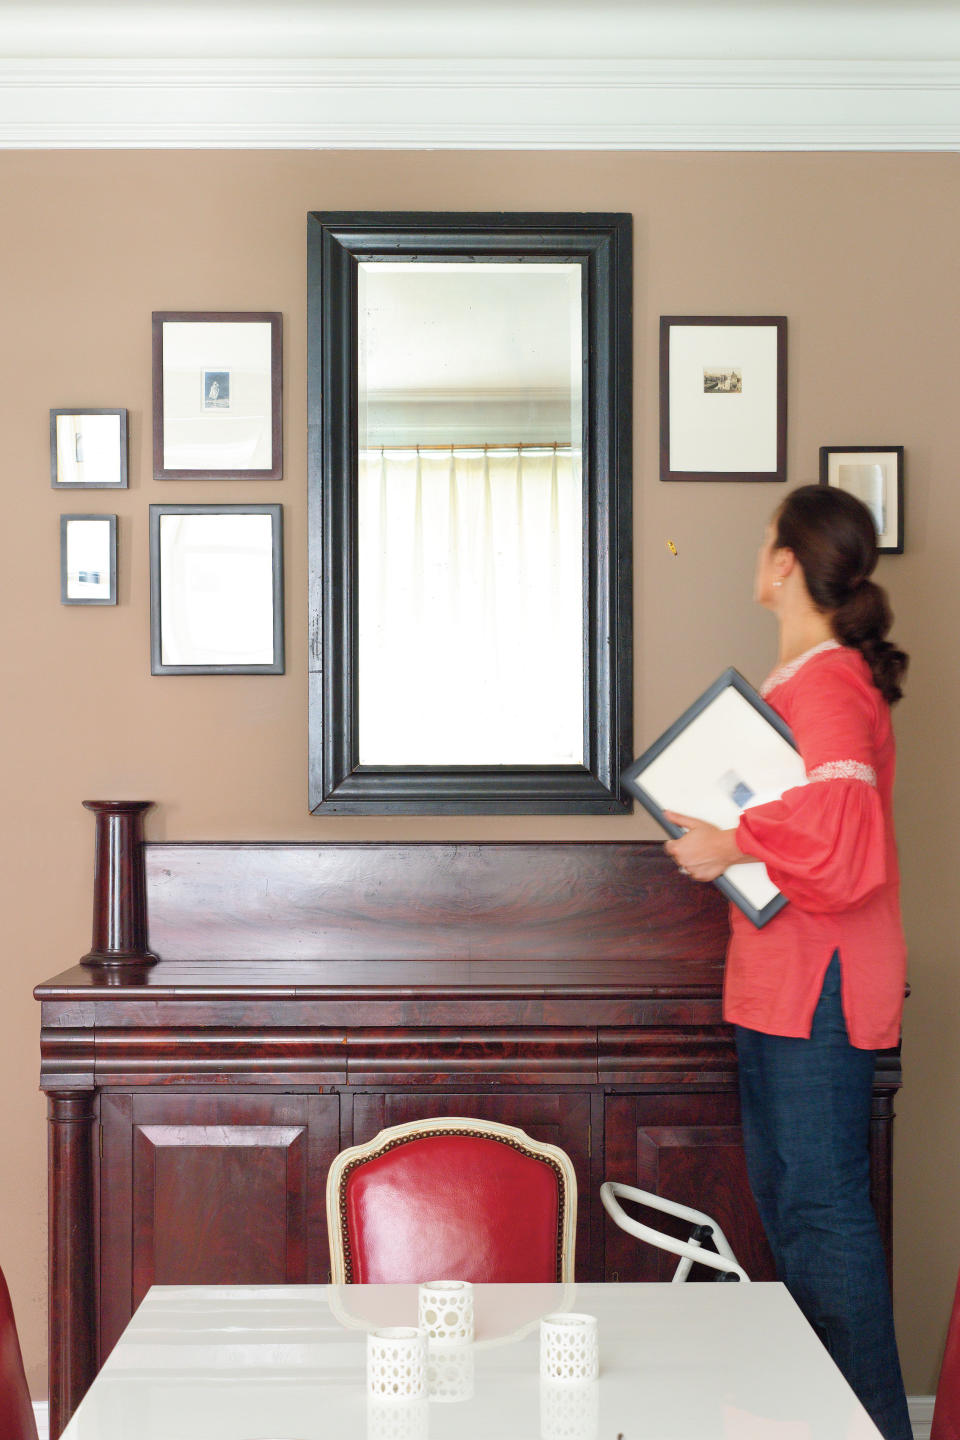 Hang a Mirror and Framed Photographs